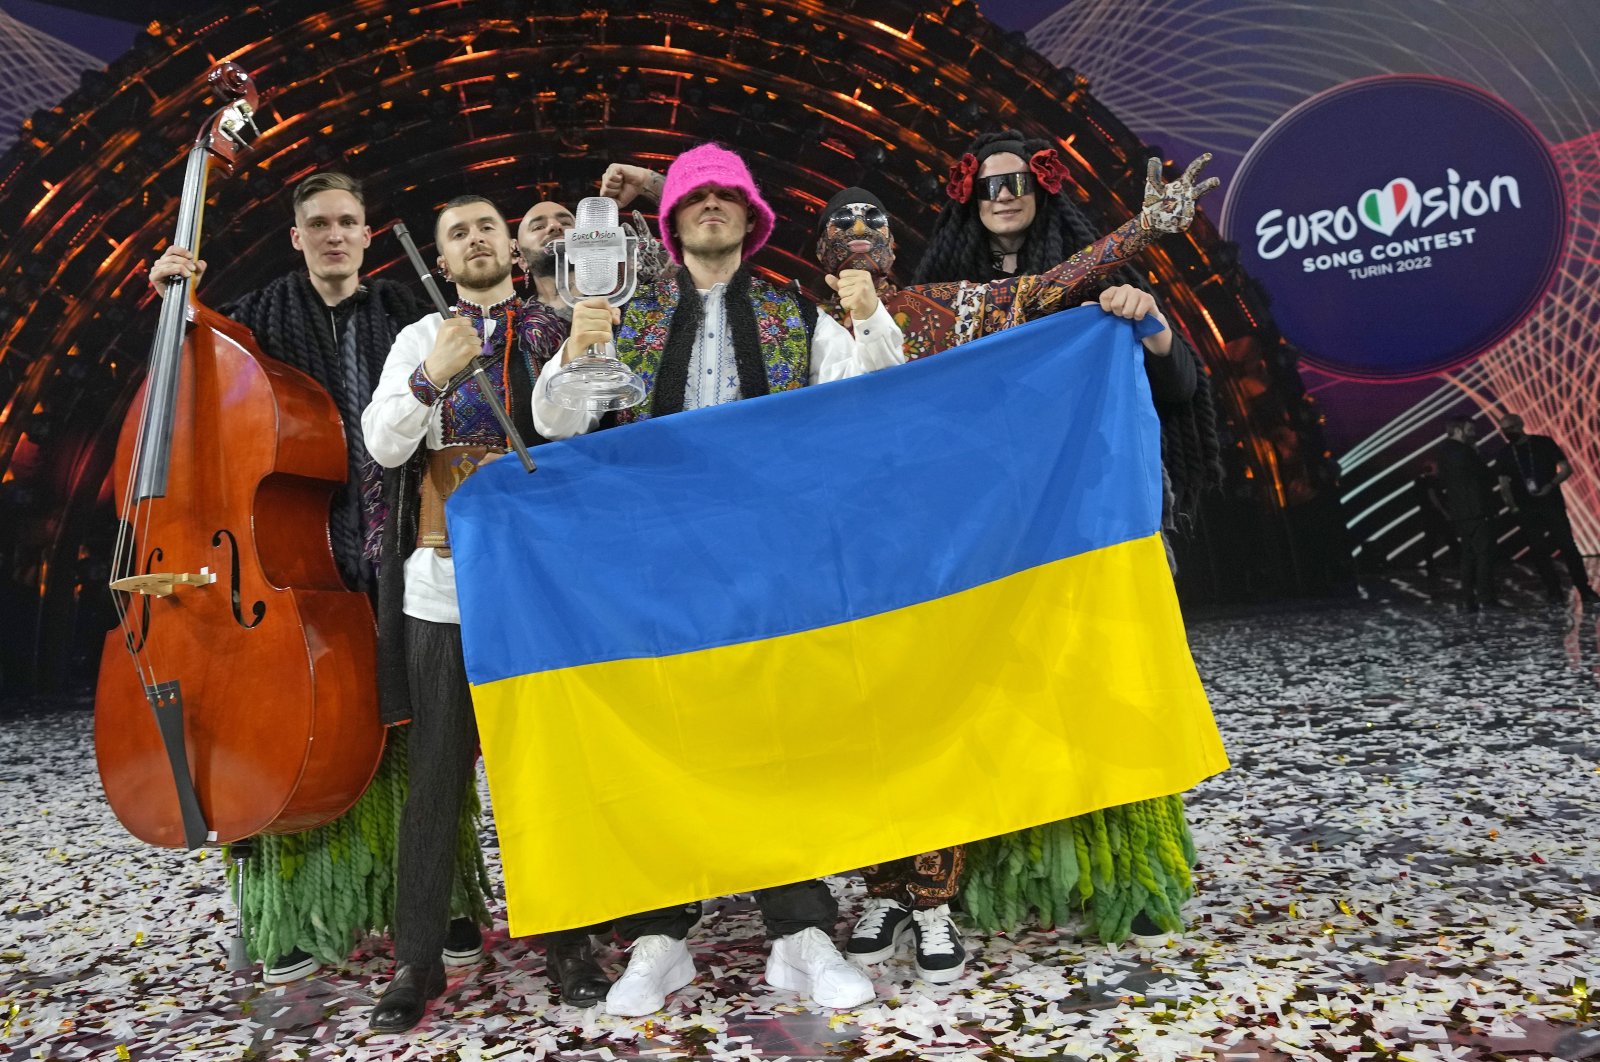 Kalush Orchestra from Ukraine celebrate after winning the Eurovision Song Contest at Palaolimpico arena, Turin, Italy, May 14, 2022. (AP Photo)